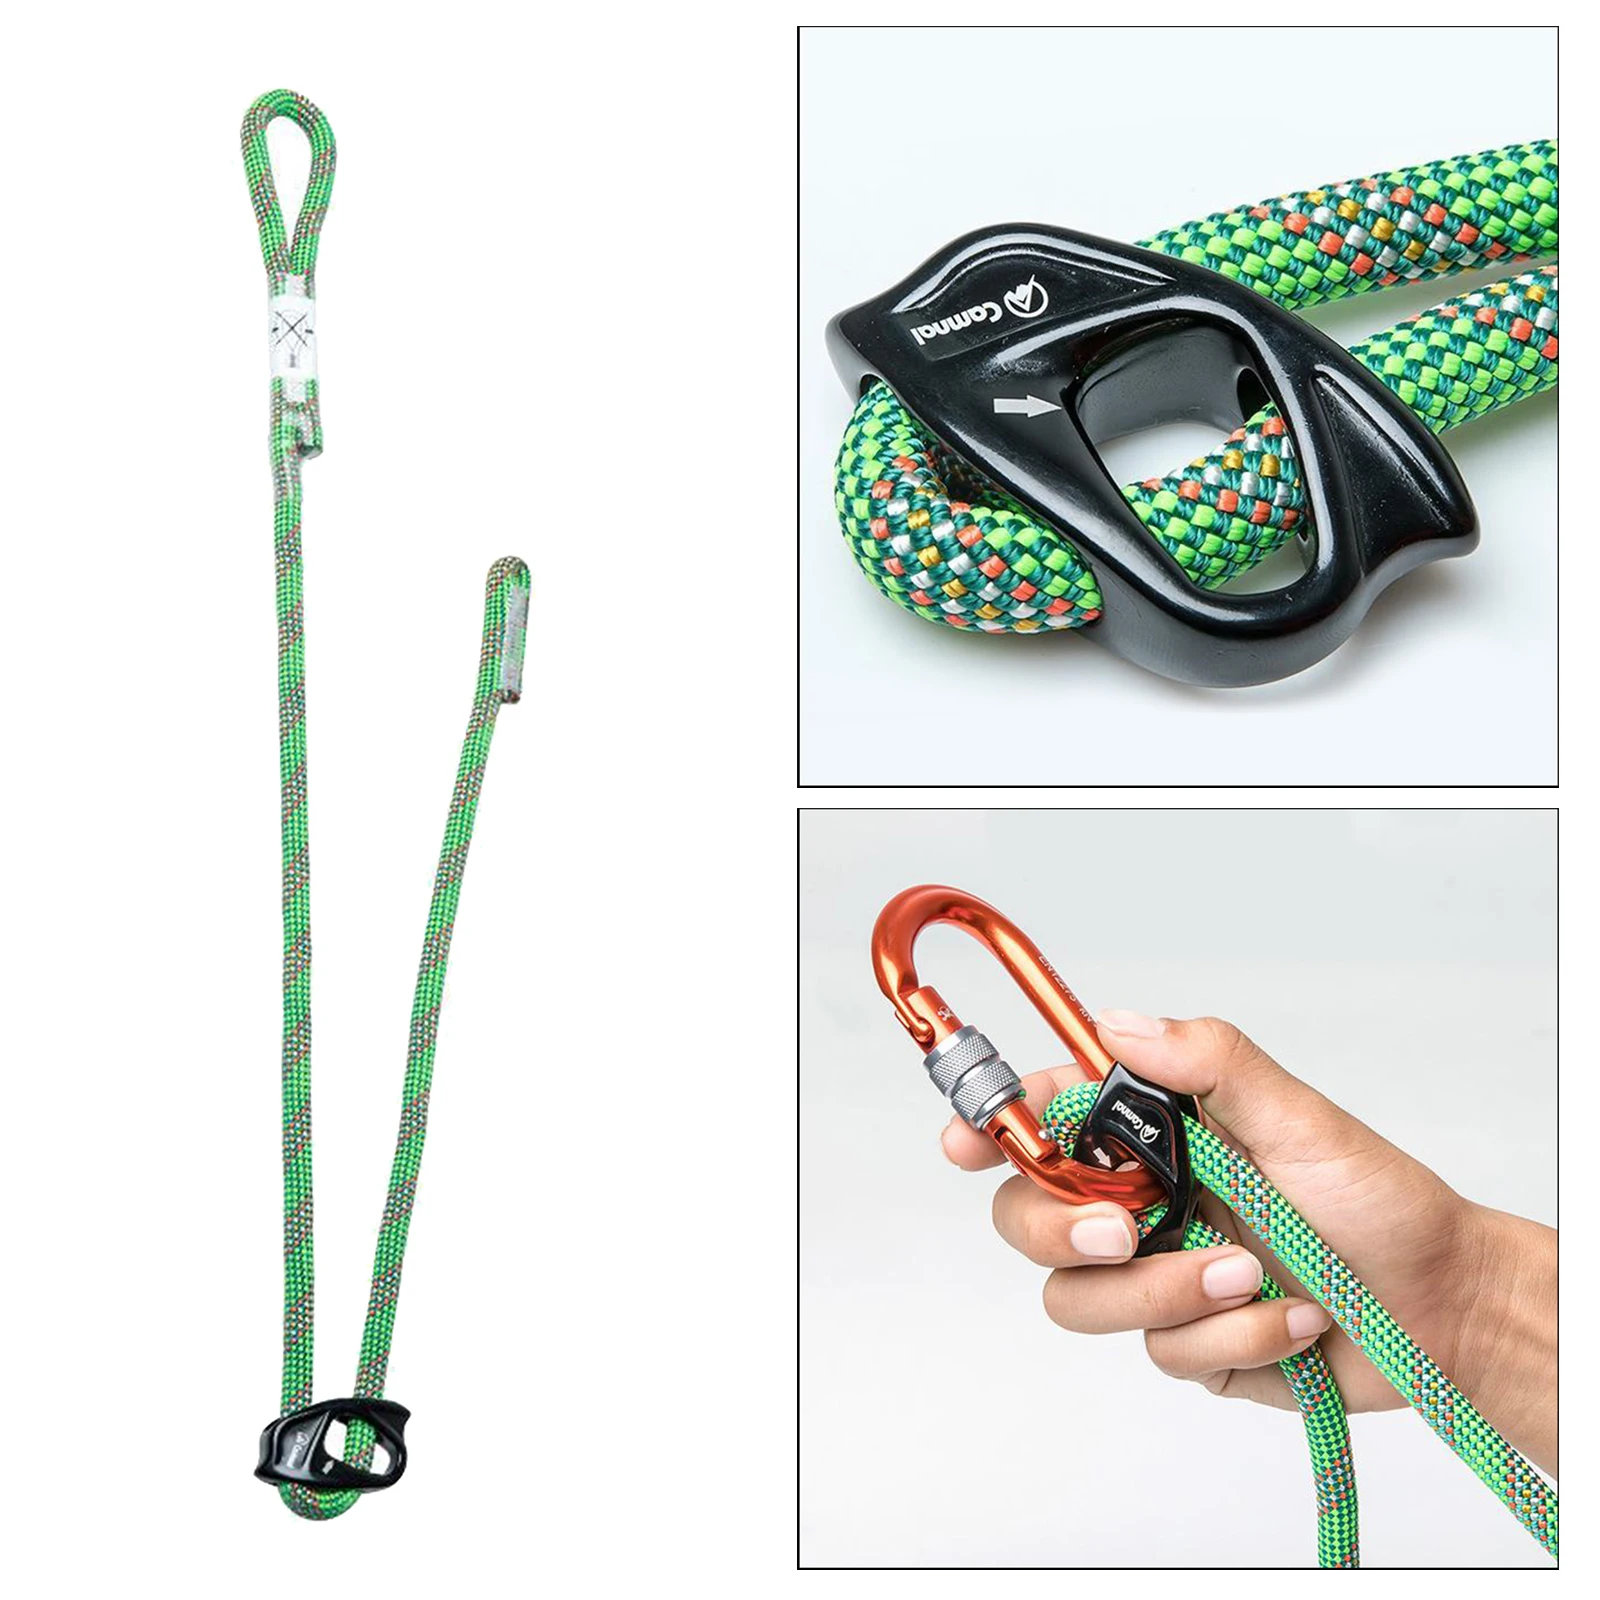 Positioning Lanyard with Extra Sturdy Dupont Line Rope Adjustable Restraint Work Climbing Accessories